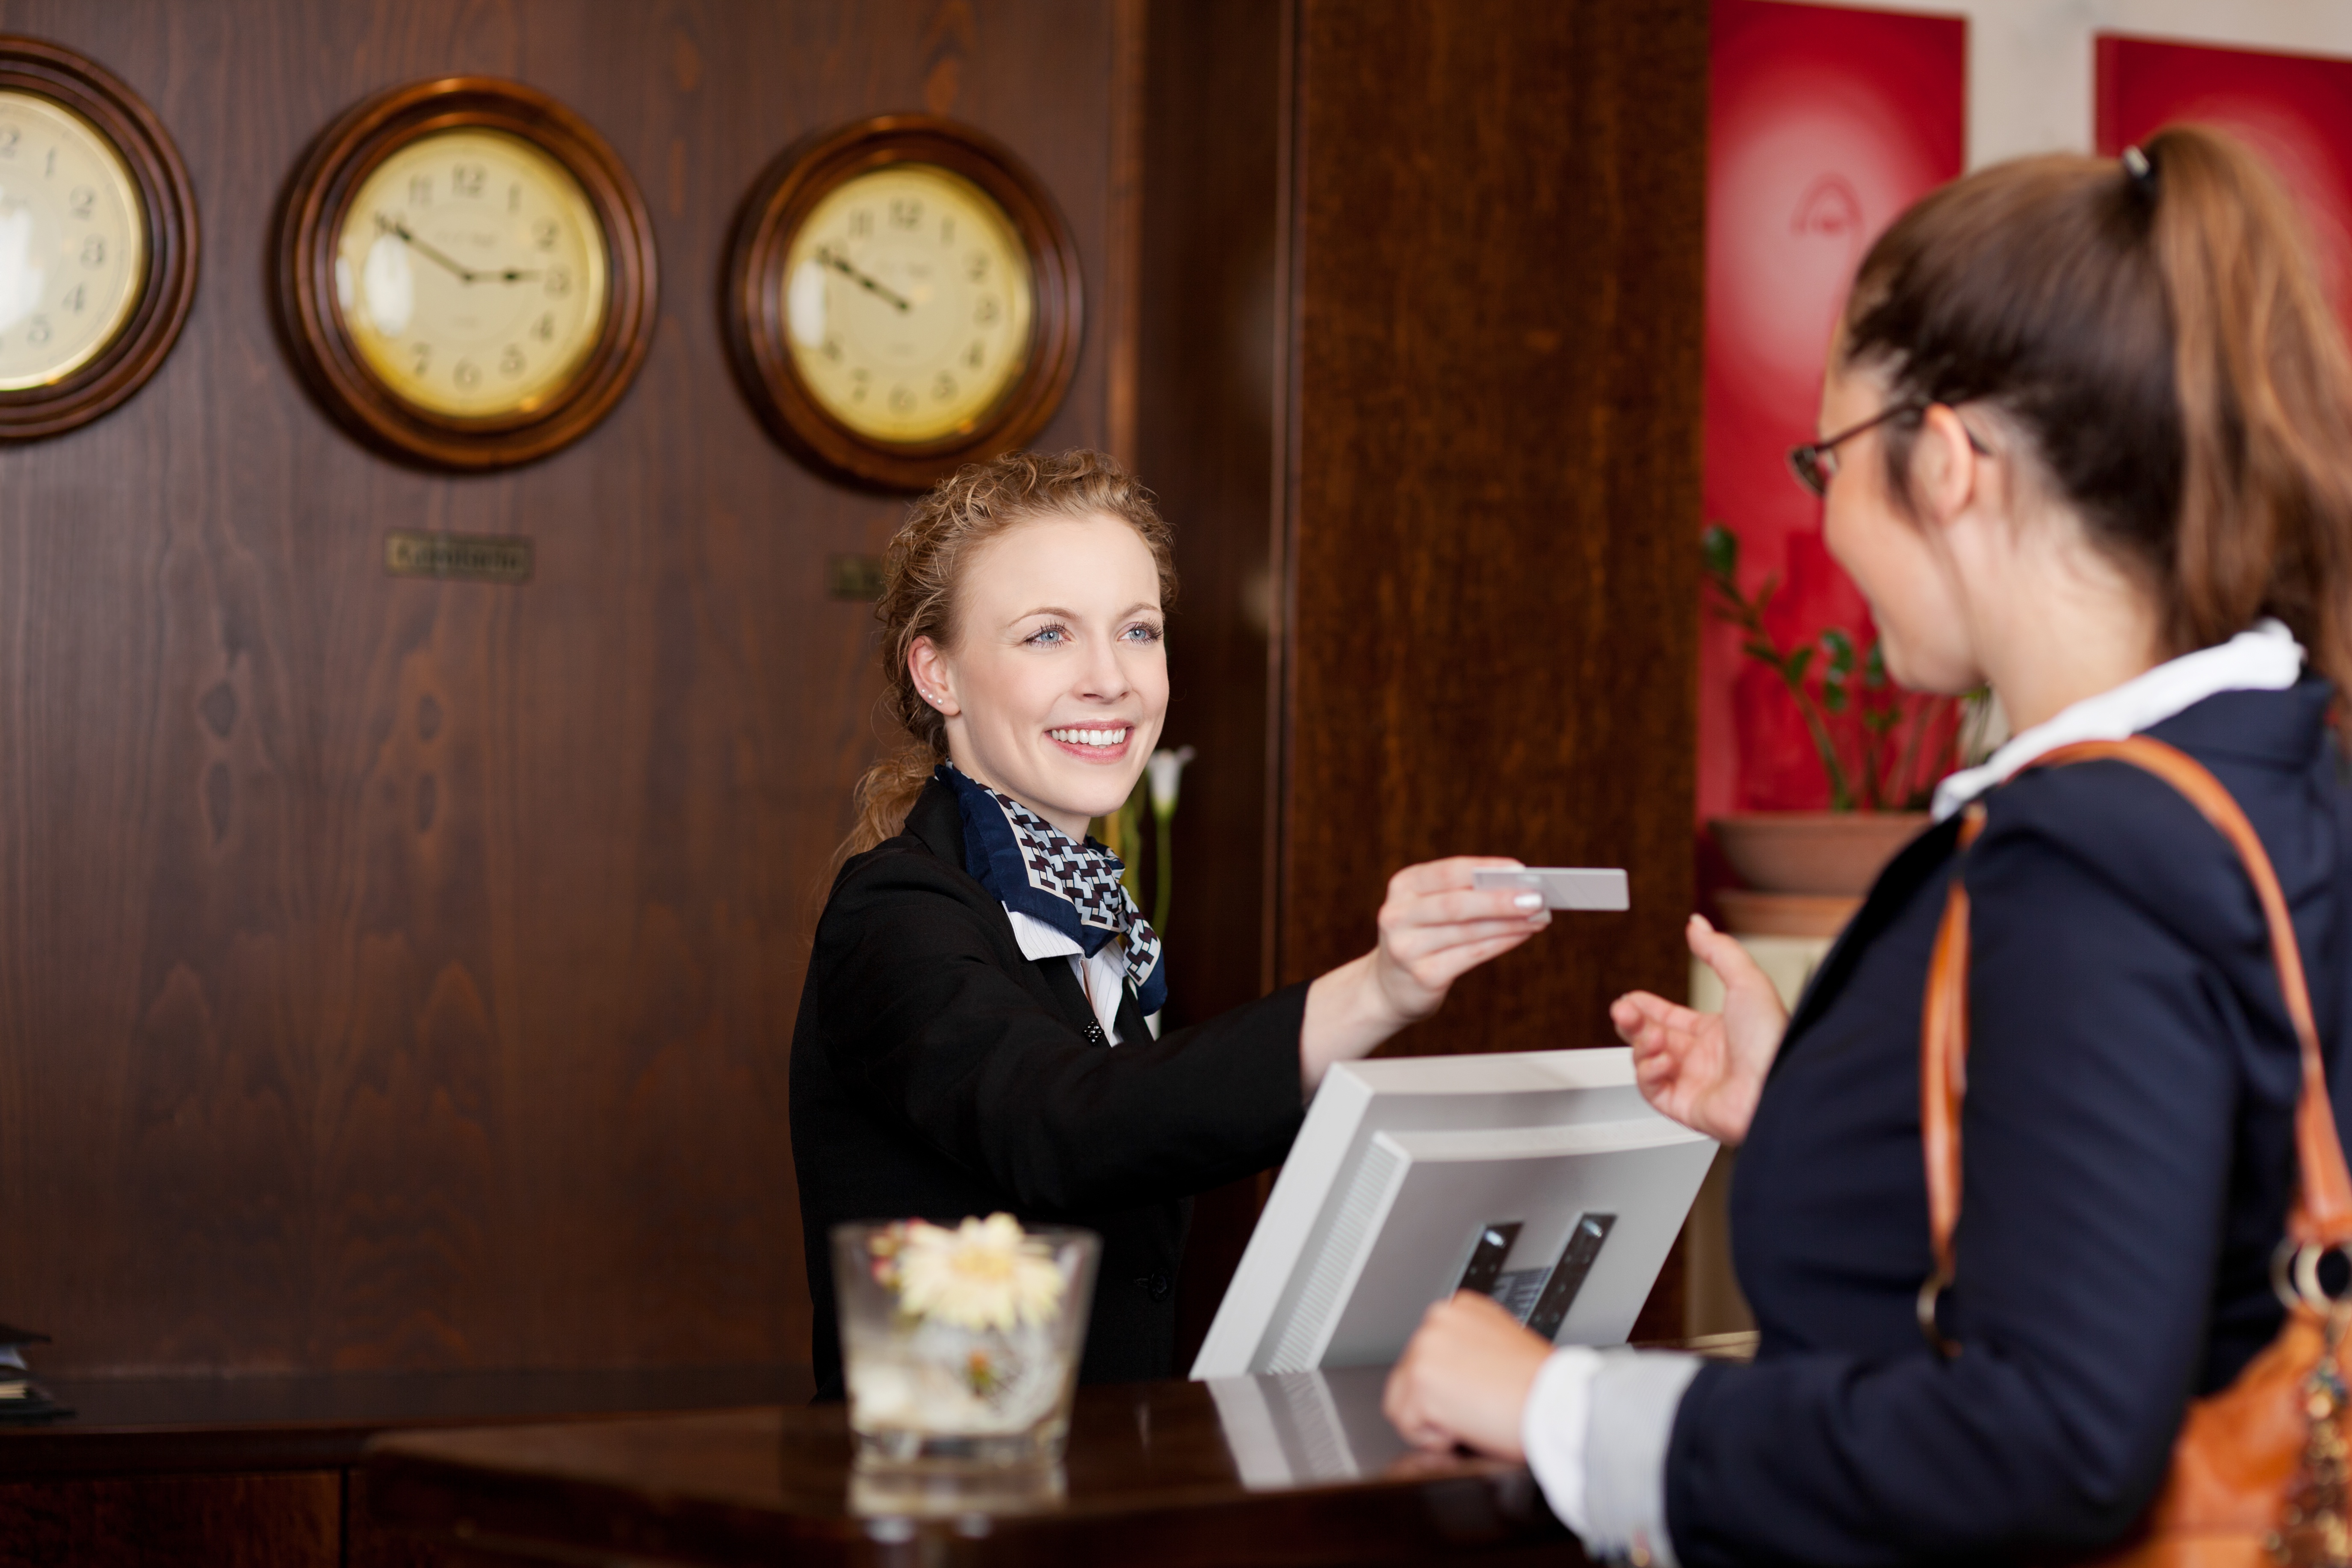 Improve Lobby Security & Efficiency with EasyLobby Visitor Management